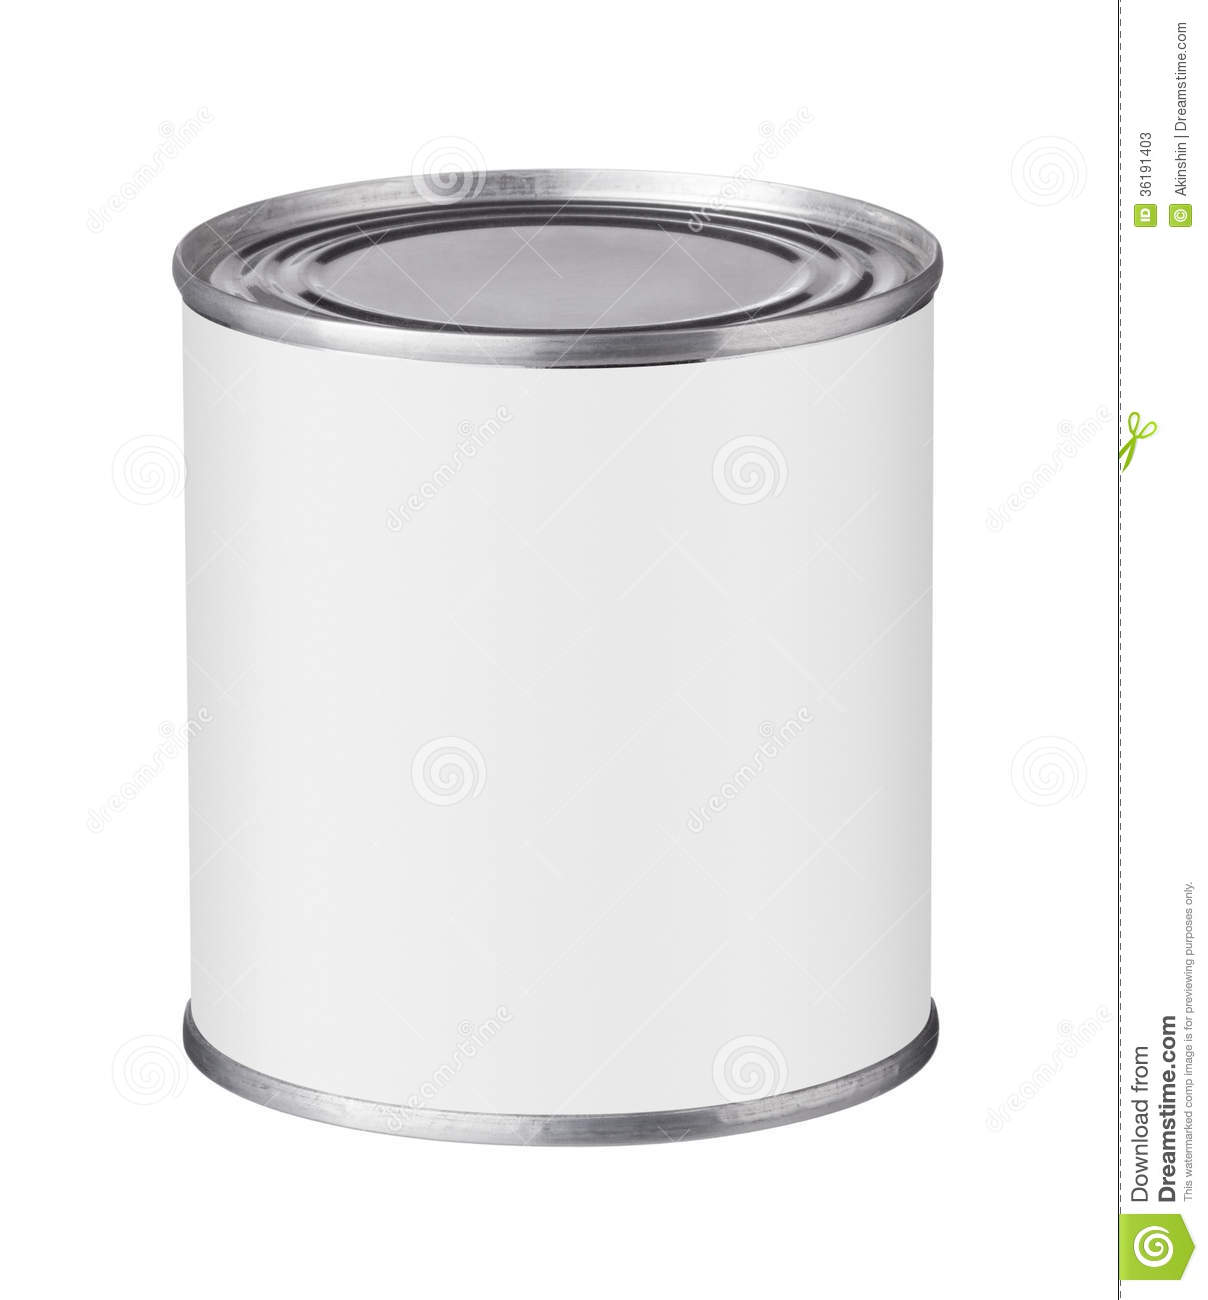 Tin Can With A Blank Label Stock Photos   Image  36191403